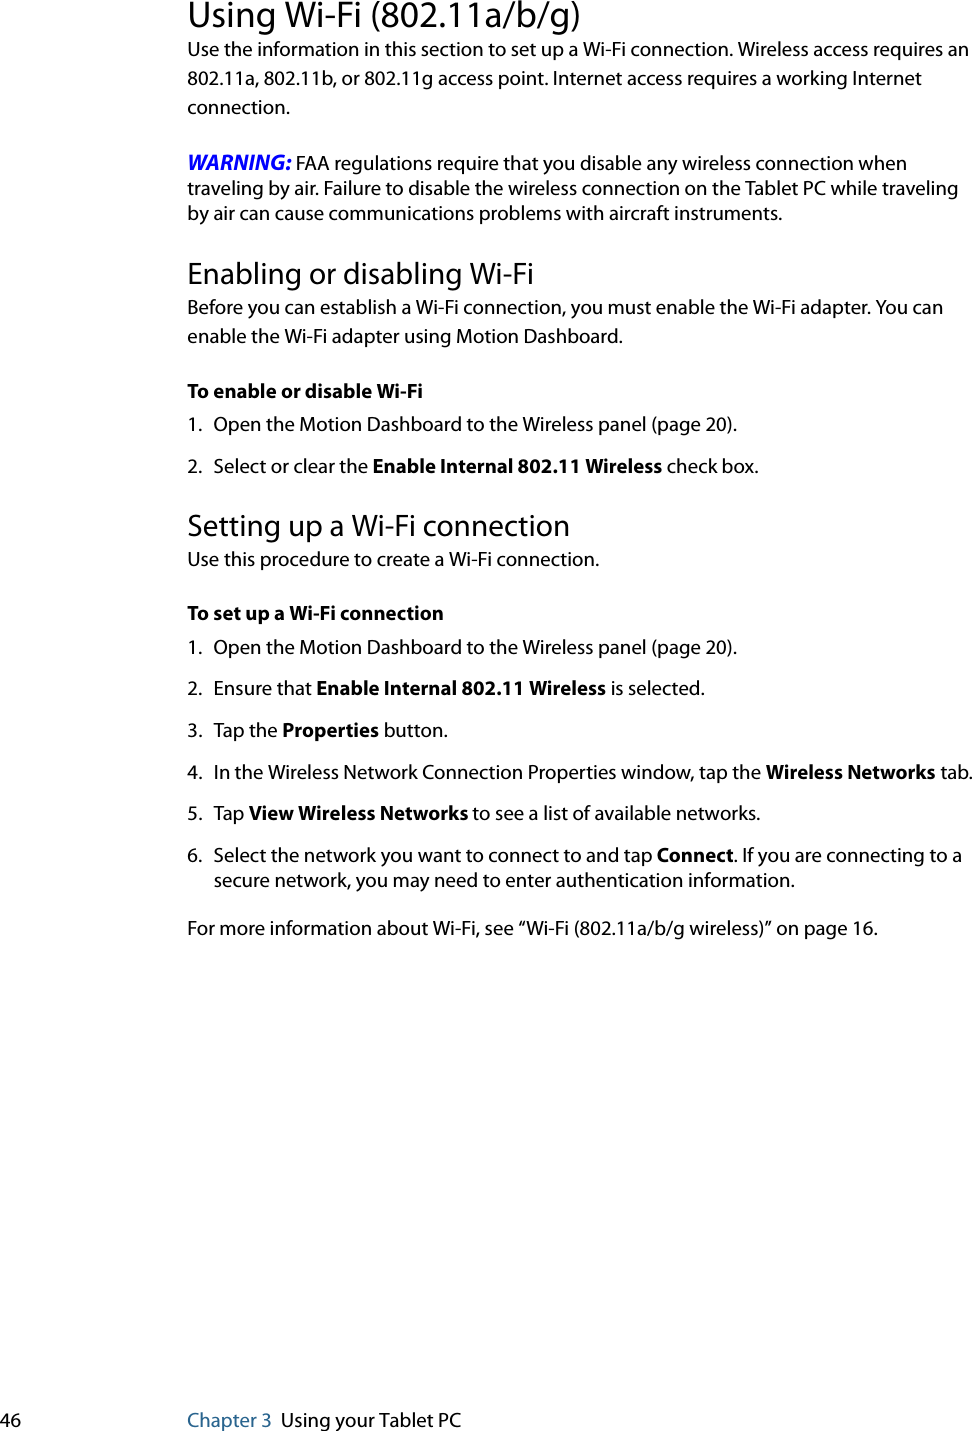 46 Chapter 3 Using your Tablet PCUsing Wi-Fi (802.11a/b/g)Use the information in this section to set up a Wi-Fi connection. Wireless access requires an 802.11a, 802.11b, or 802.11g access point. Internet access requires a working Internet connection.WARNING: FAA regulations require that you disable any wireless connection when traveling by air. Failure to disable the wireless connection on the Tablet PC while traveling by air can cause communications problems with aircraft instruments.Enabling or disabling Wi-FiBefore you can establish a Wi-Fi connection, you must enable the Wi-Fi adapter. You can enable the Wi-Fi adapter using Motion Dashboard.To enable or disable Wi-Fi1. Open the Motion Dashboard to the Wireless panel (page 20).2. Select or clear the Enable Internal 802.11 Wireless check box.Setting up a Wi-Fi connectionUse this procedure to create a Wi-Fi connection.To set up a Wi-Fi connection1. Open the Motion Dashboard to the Wireless panel (page 20).2. Ensure that Enable Internal 802.11 Wireless is selected.3. Tap the Properties button.4. In the Wireless Network Connection Properties window, tap the Wireless Networks tab.5. Tap View Wireless Networks to see a list of available networks.6. Select the network you want to connect to and tap Connect. If you are connecting to a secure network, you may need to enter authentication information.For more information about Wi-Fi, see “Wi-Fi (802.11a/b/g wireless)” on page 16.